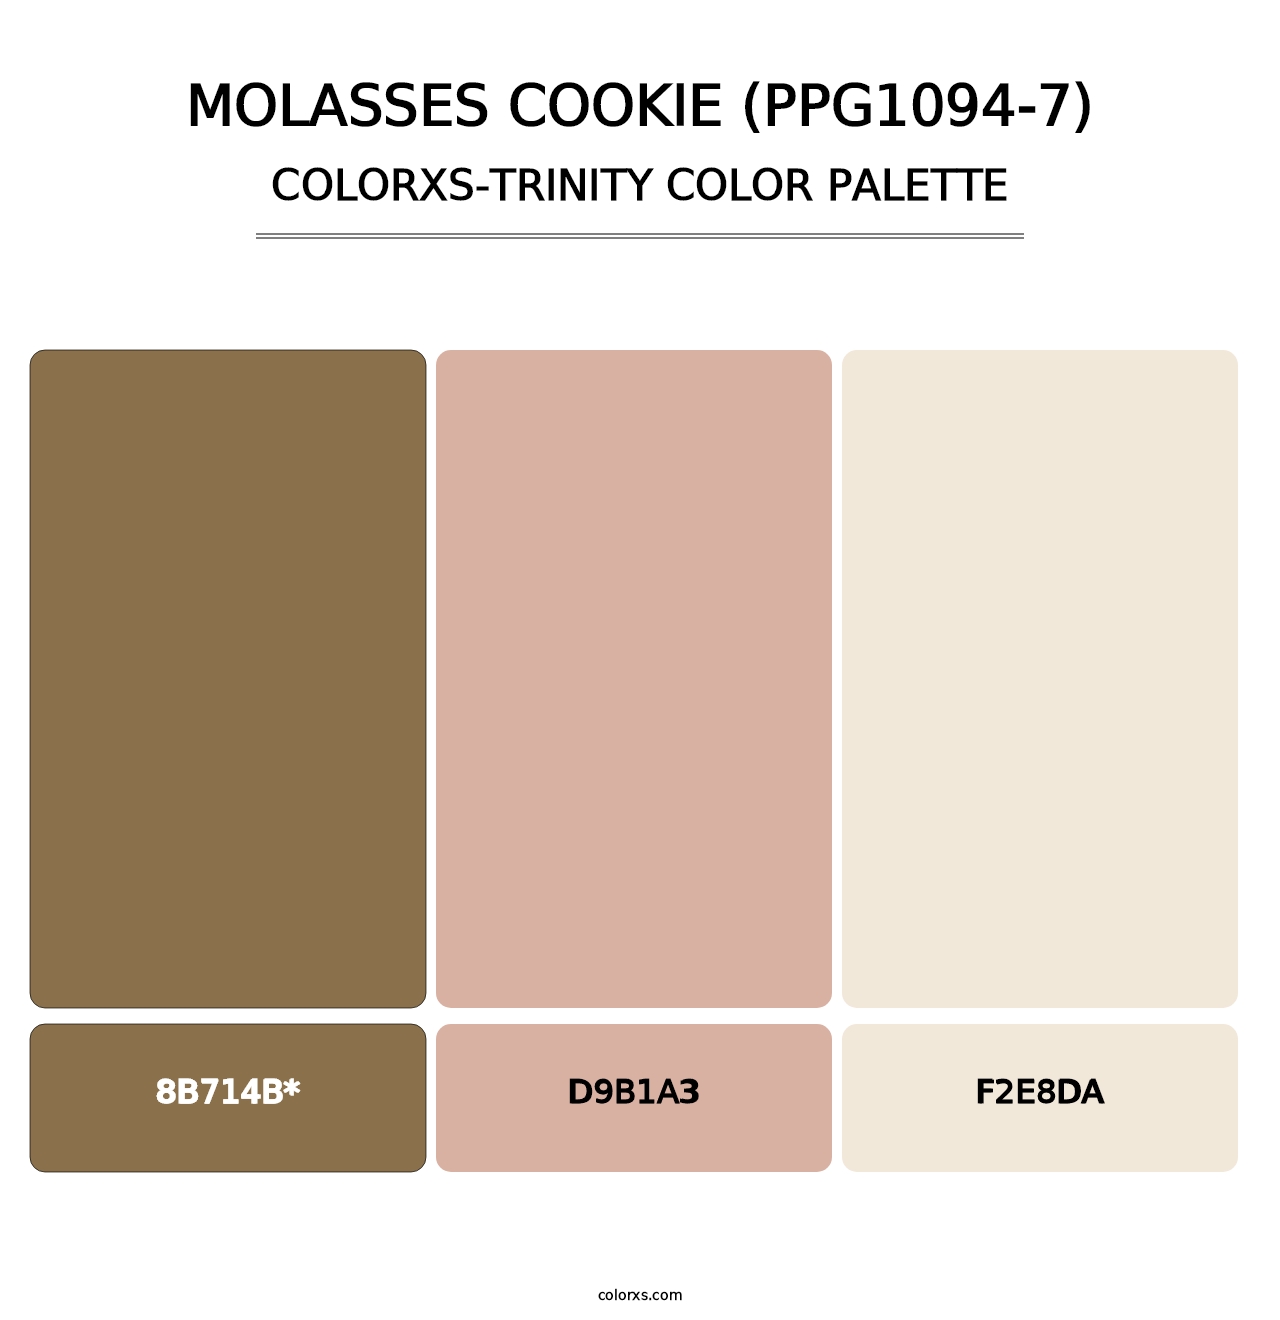 Molasses Cookie (PPG1094-7) - Colorxs Trinity Palette